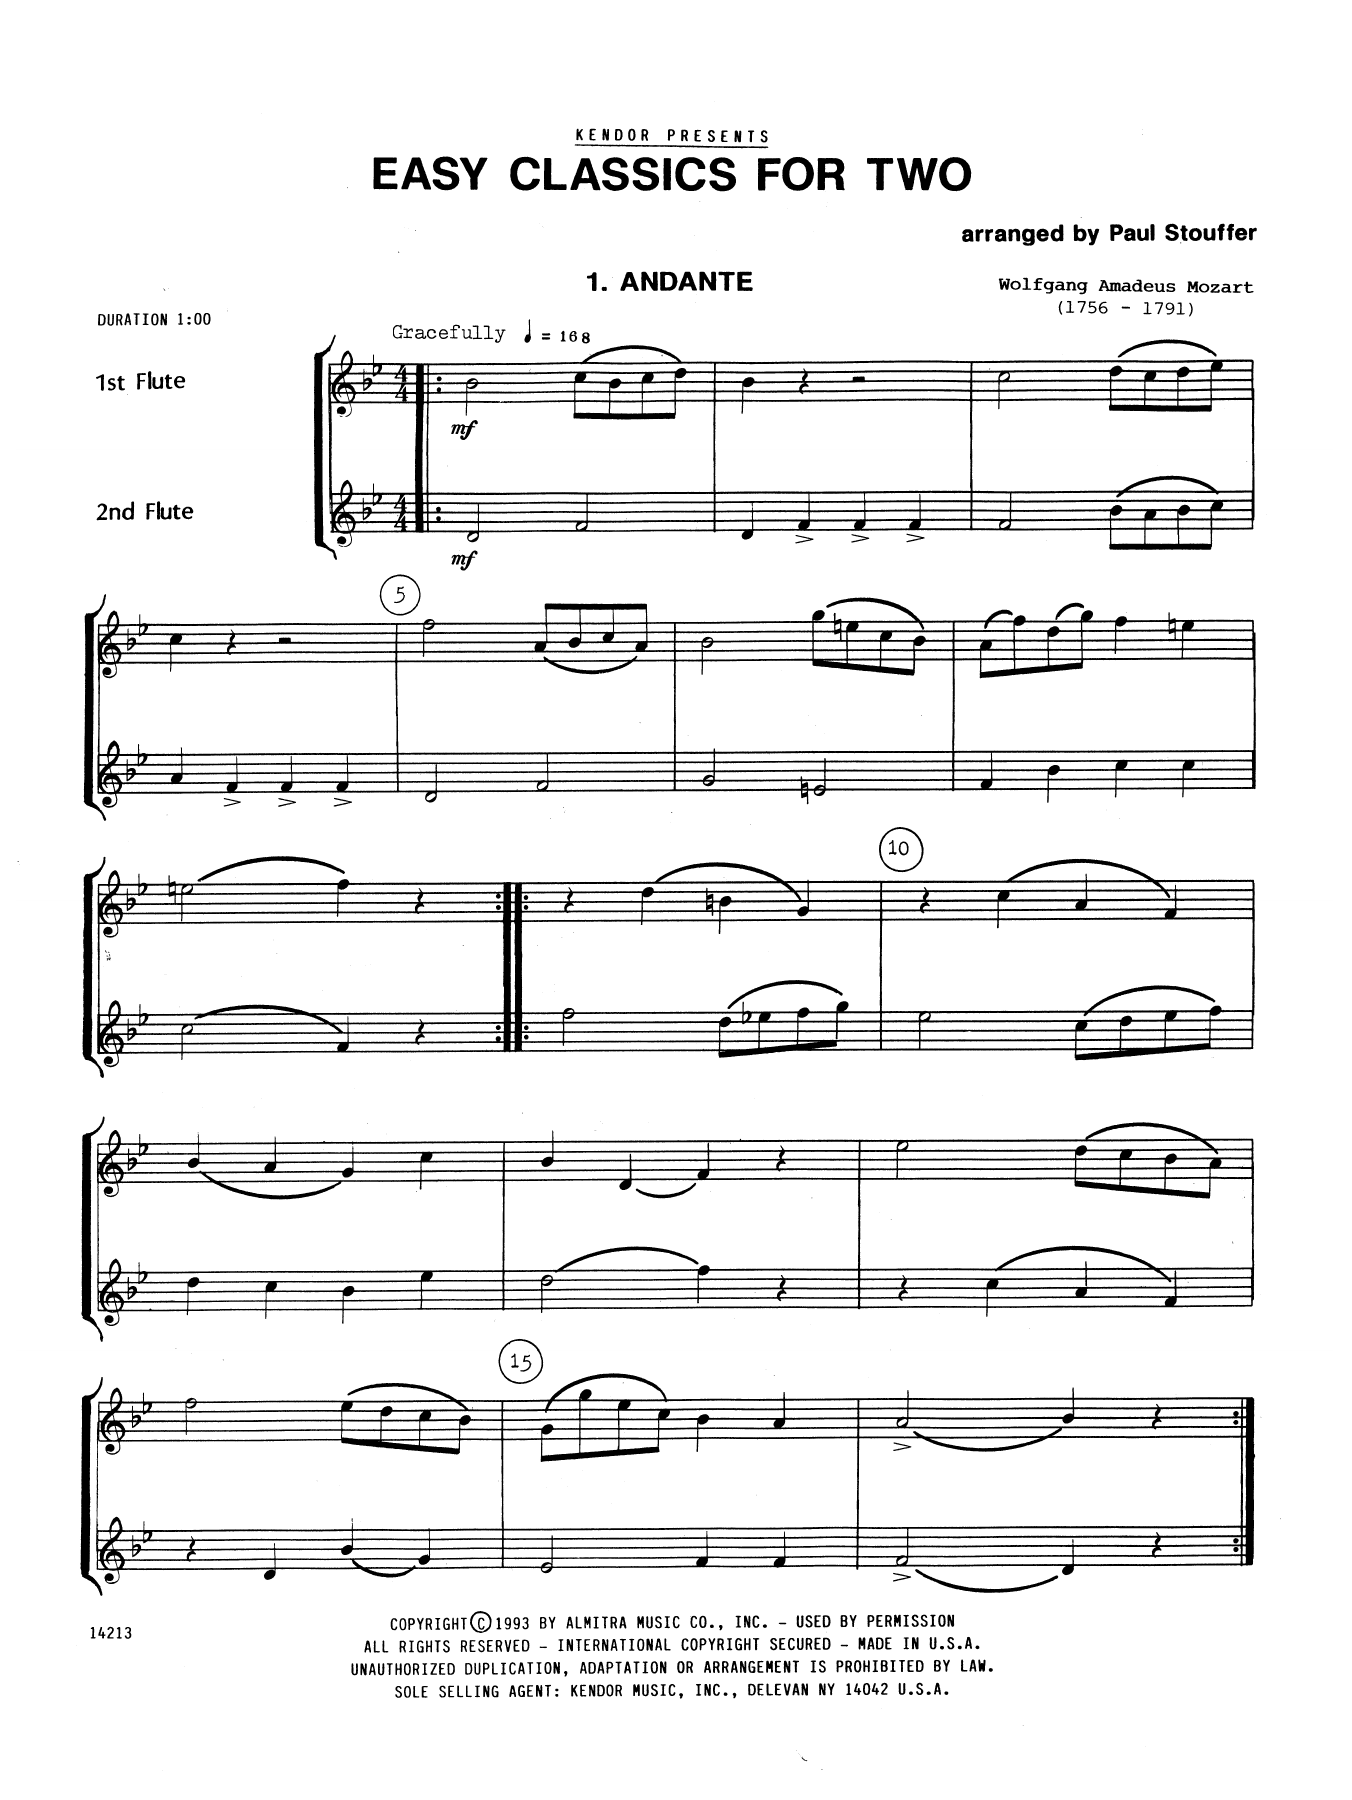 Download Paul Stouffer Easy Classics For Two Sheet Music